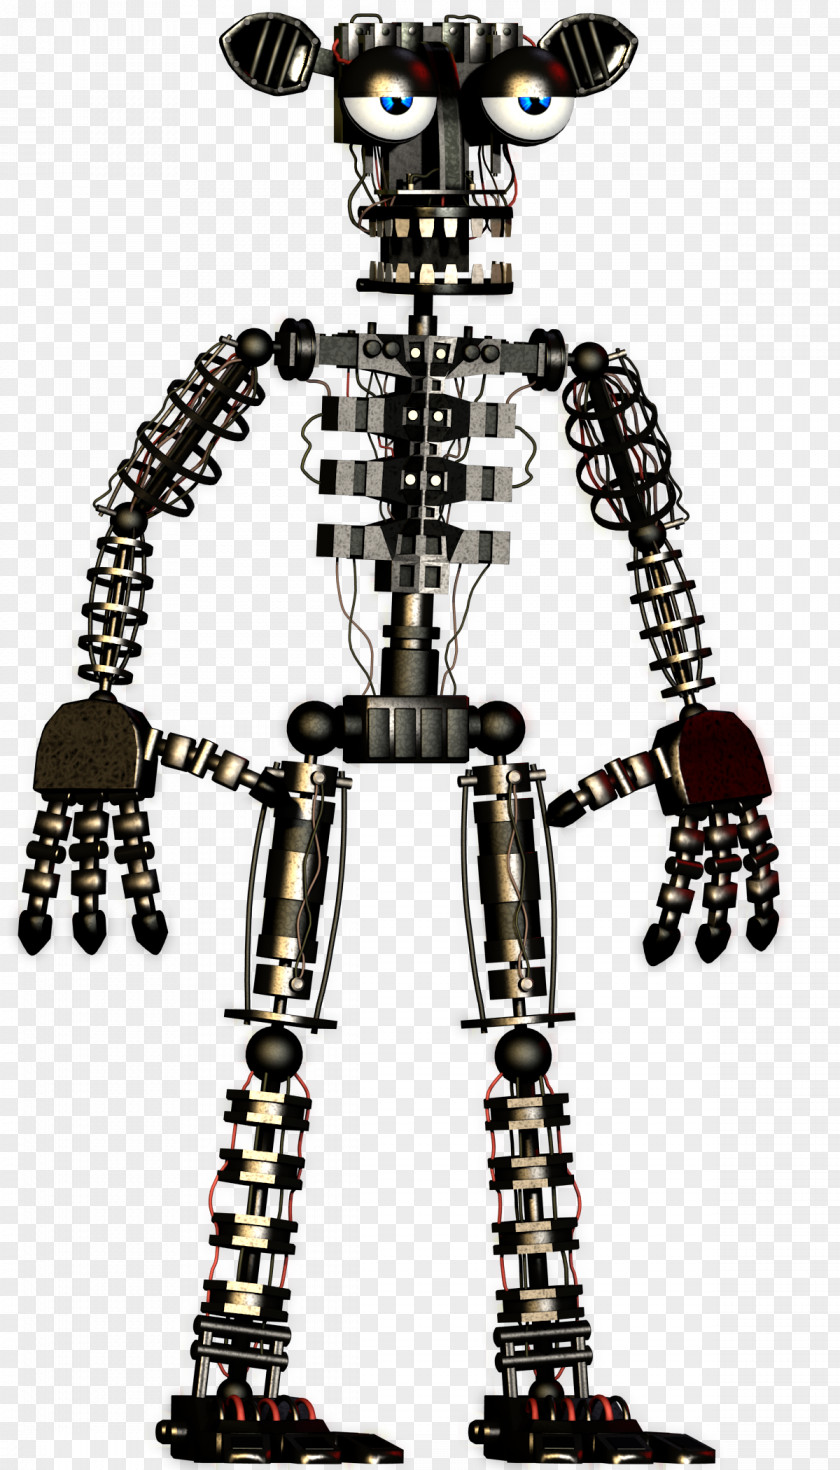 Nightmare Foxy Five Nights At Freddy's 2 Freddy's: Sister Location 4 Endoskeleton PNG